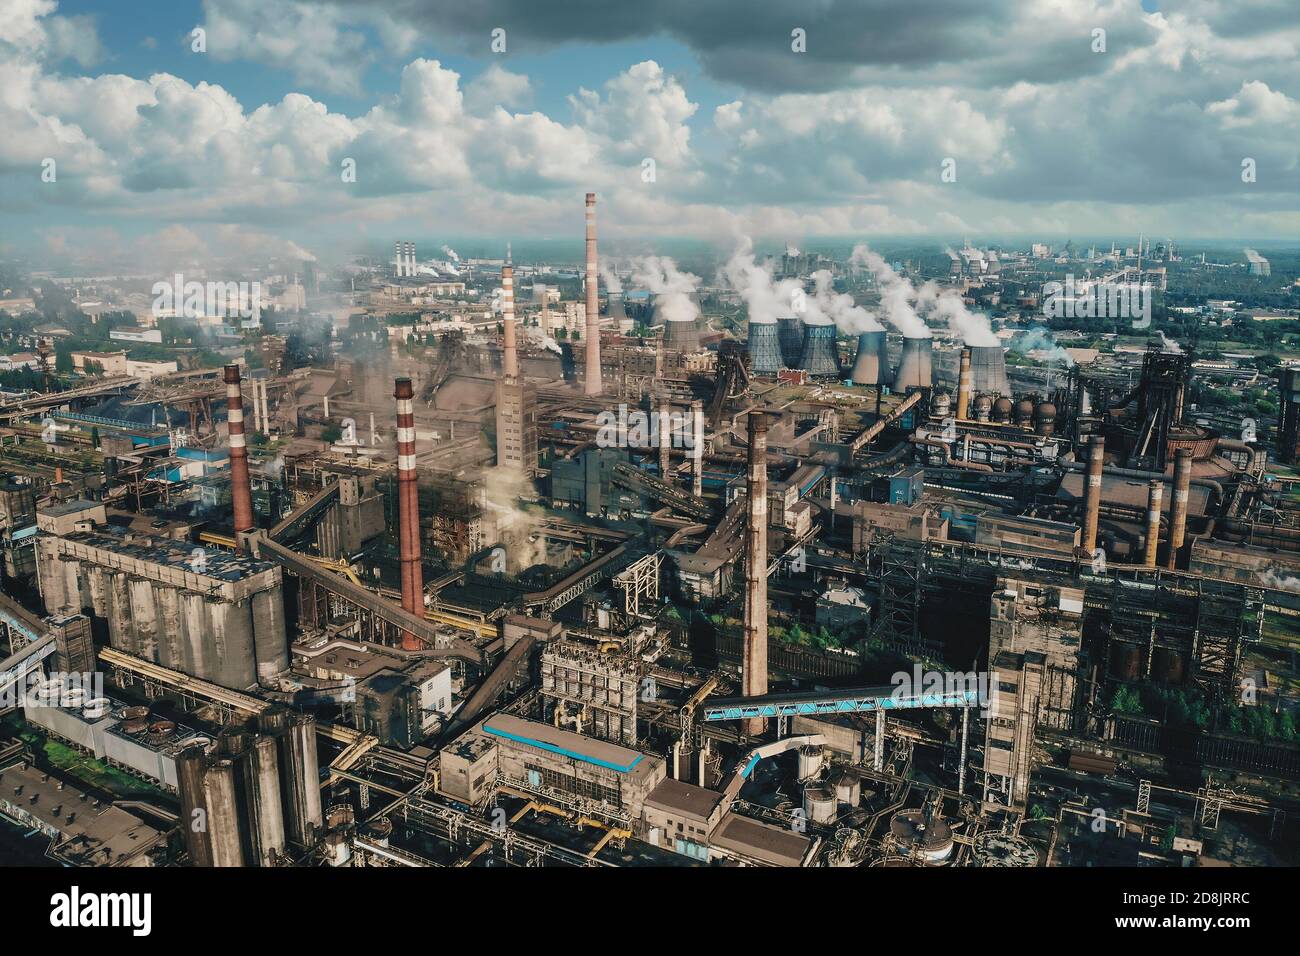 Oil industry. Aerial view of Petrochemical industrial factory, heavy industry, refinery production with smoke pollution. Stock Photo